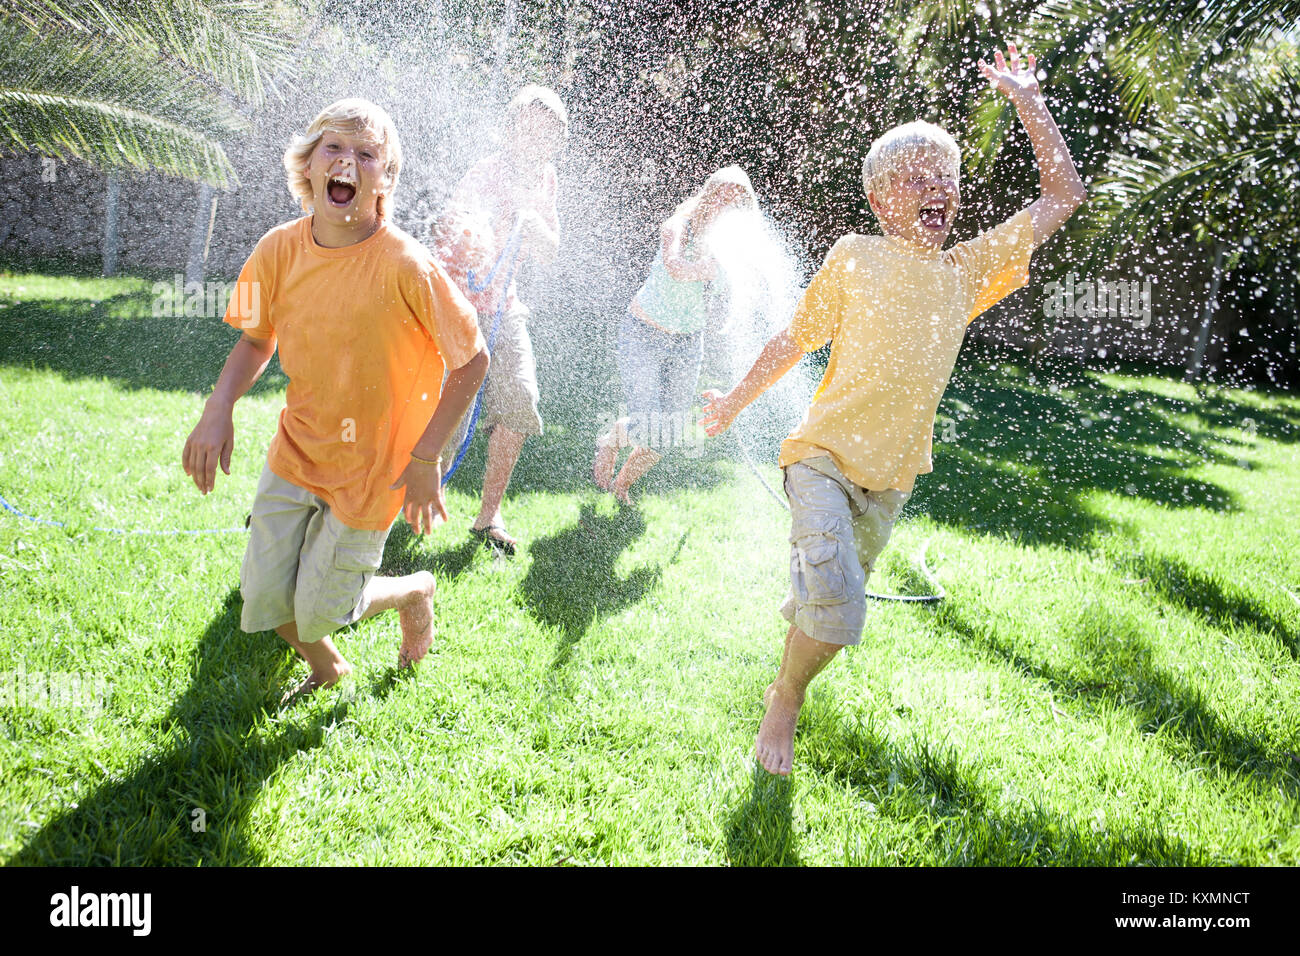 Parents in garden spraying sons with water from hosepipe Stock Photo